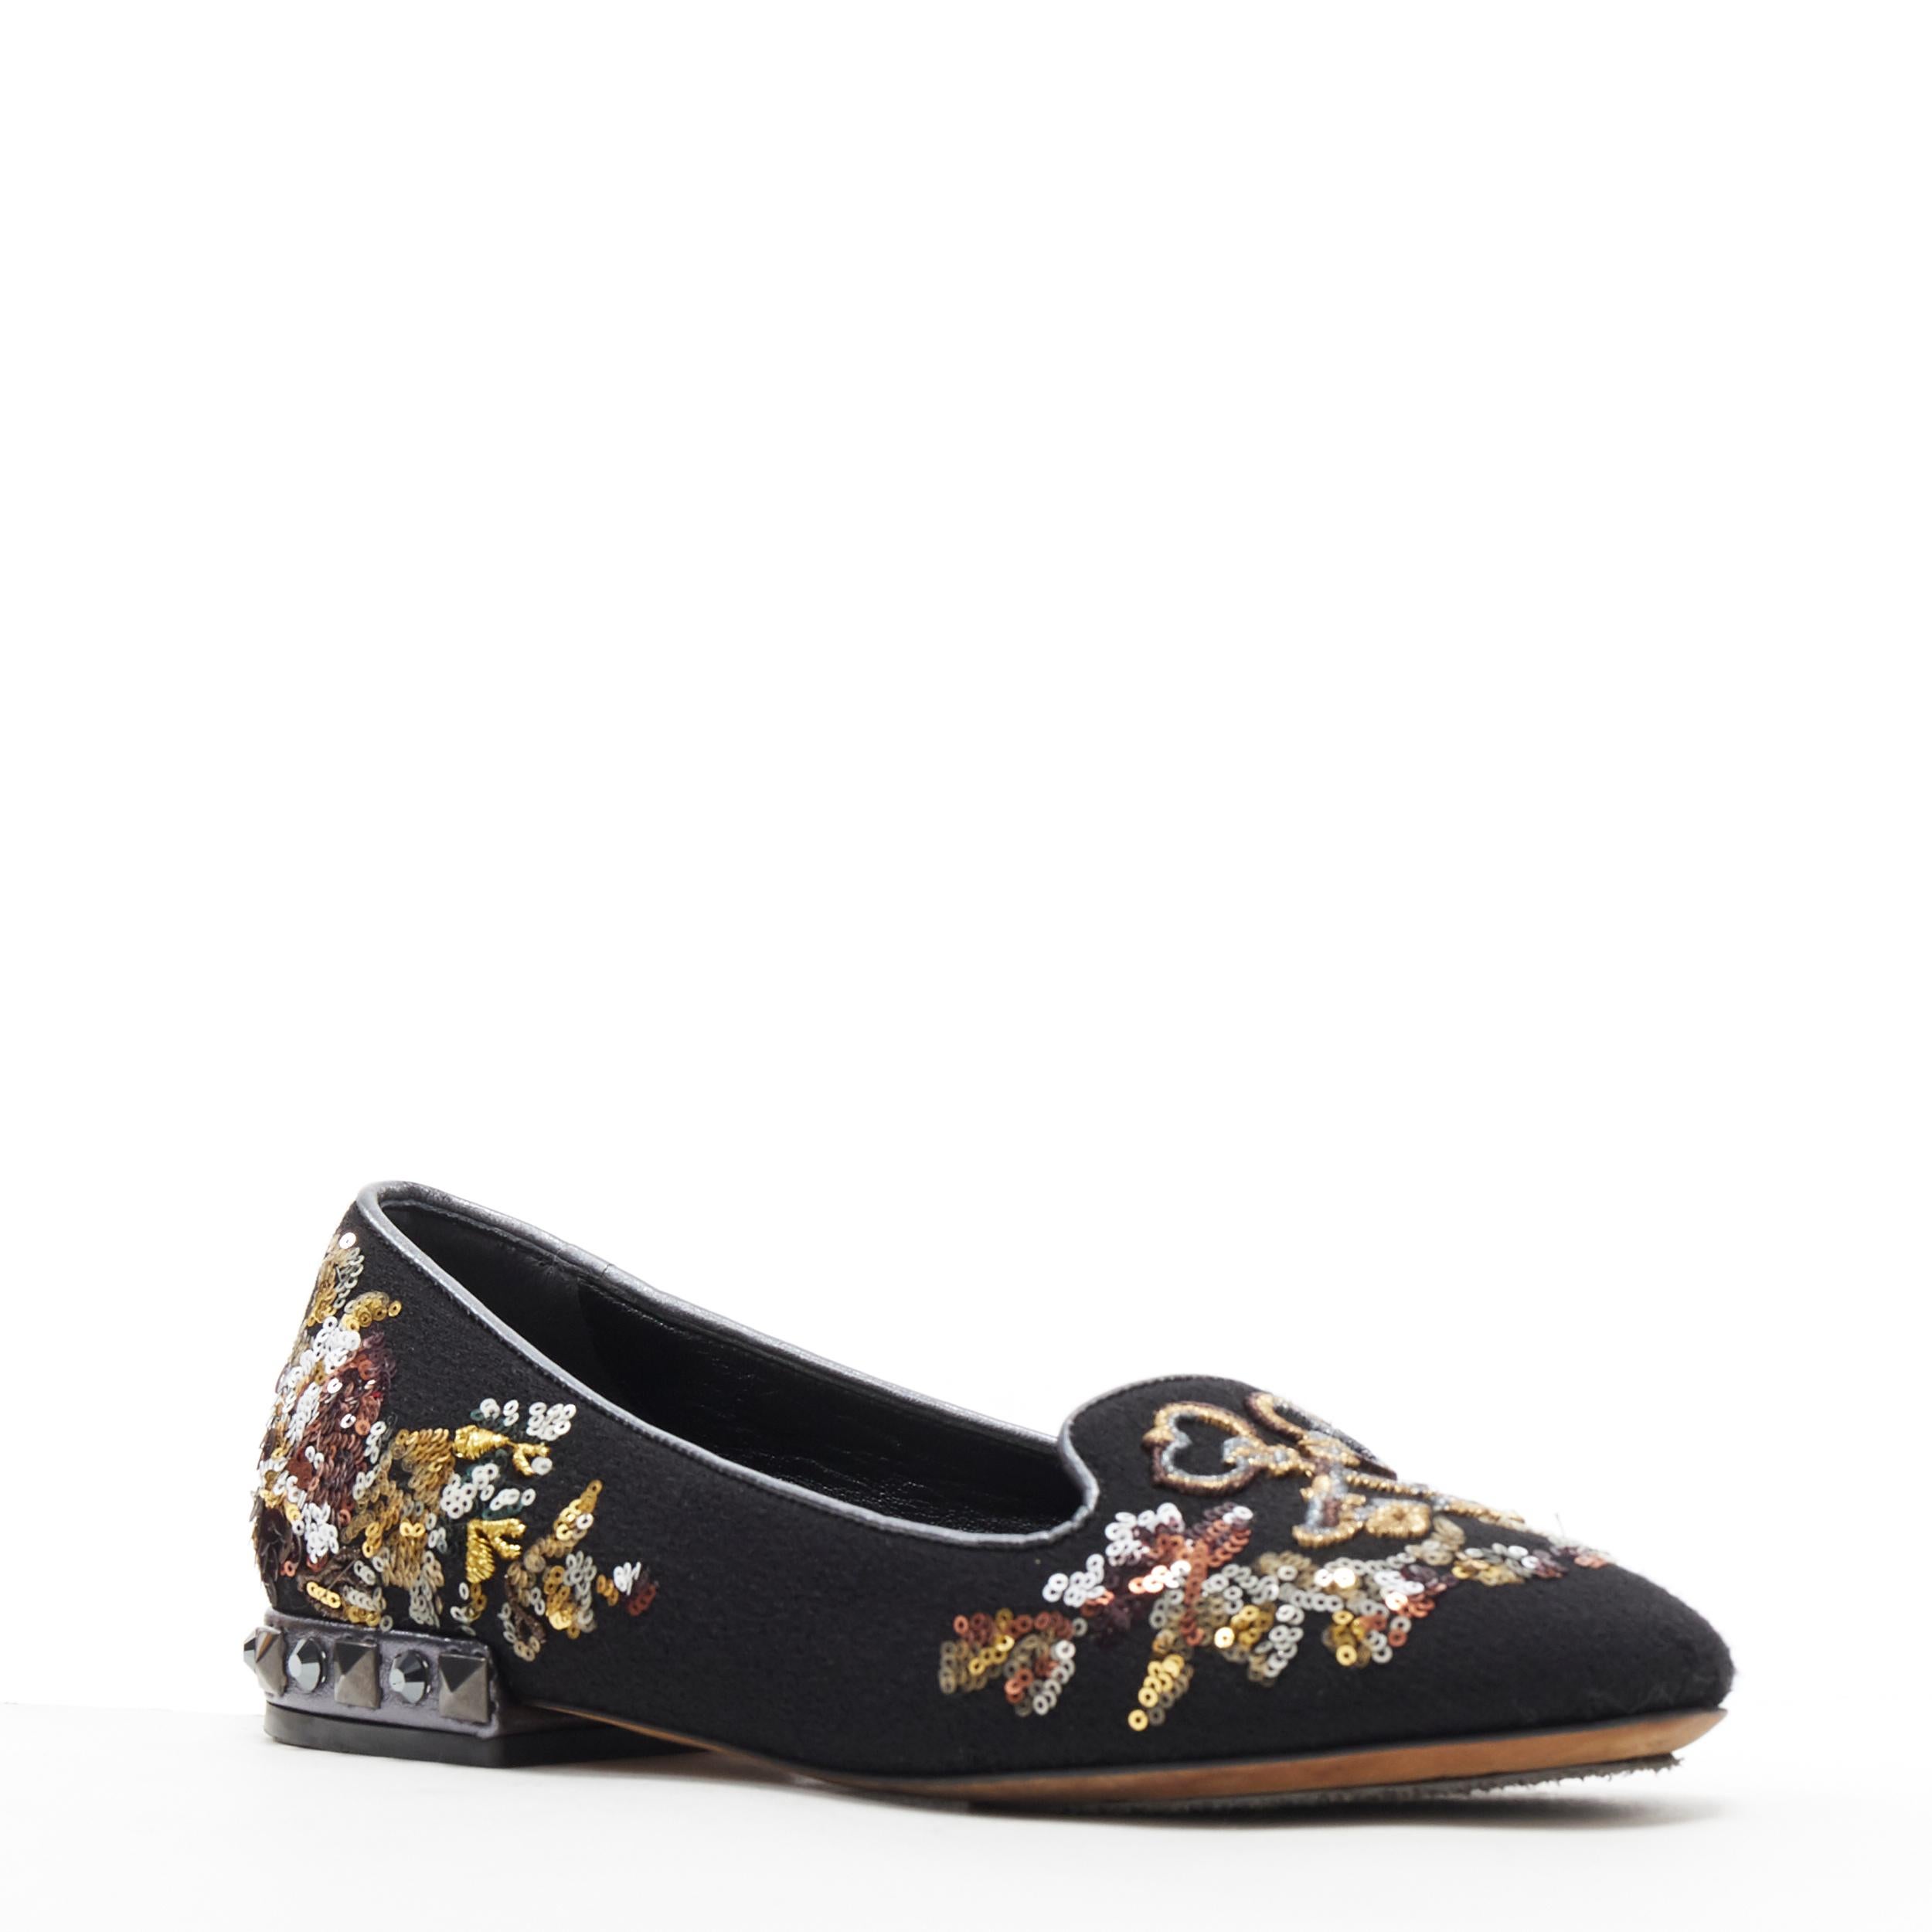 DOLCE GABBANA black suede royalty key sequin studded heel flat loafer EU35
Brand: Dolce Gabanna
Model Name / Style: Loafer flats
Material: Fabric
Color: Black
Pattern: Solid
Extra Detail: Silver leather piping. Flat (Under 1 in) heel height. Almond